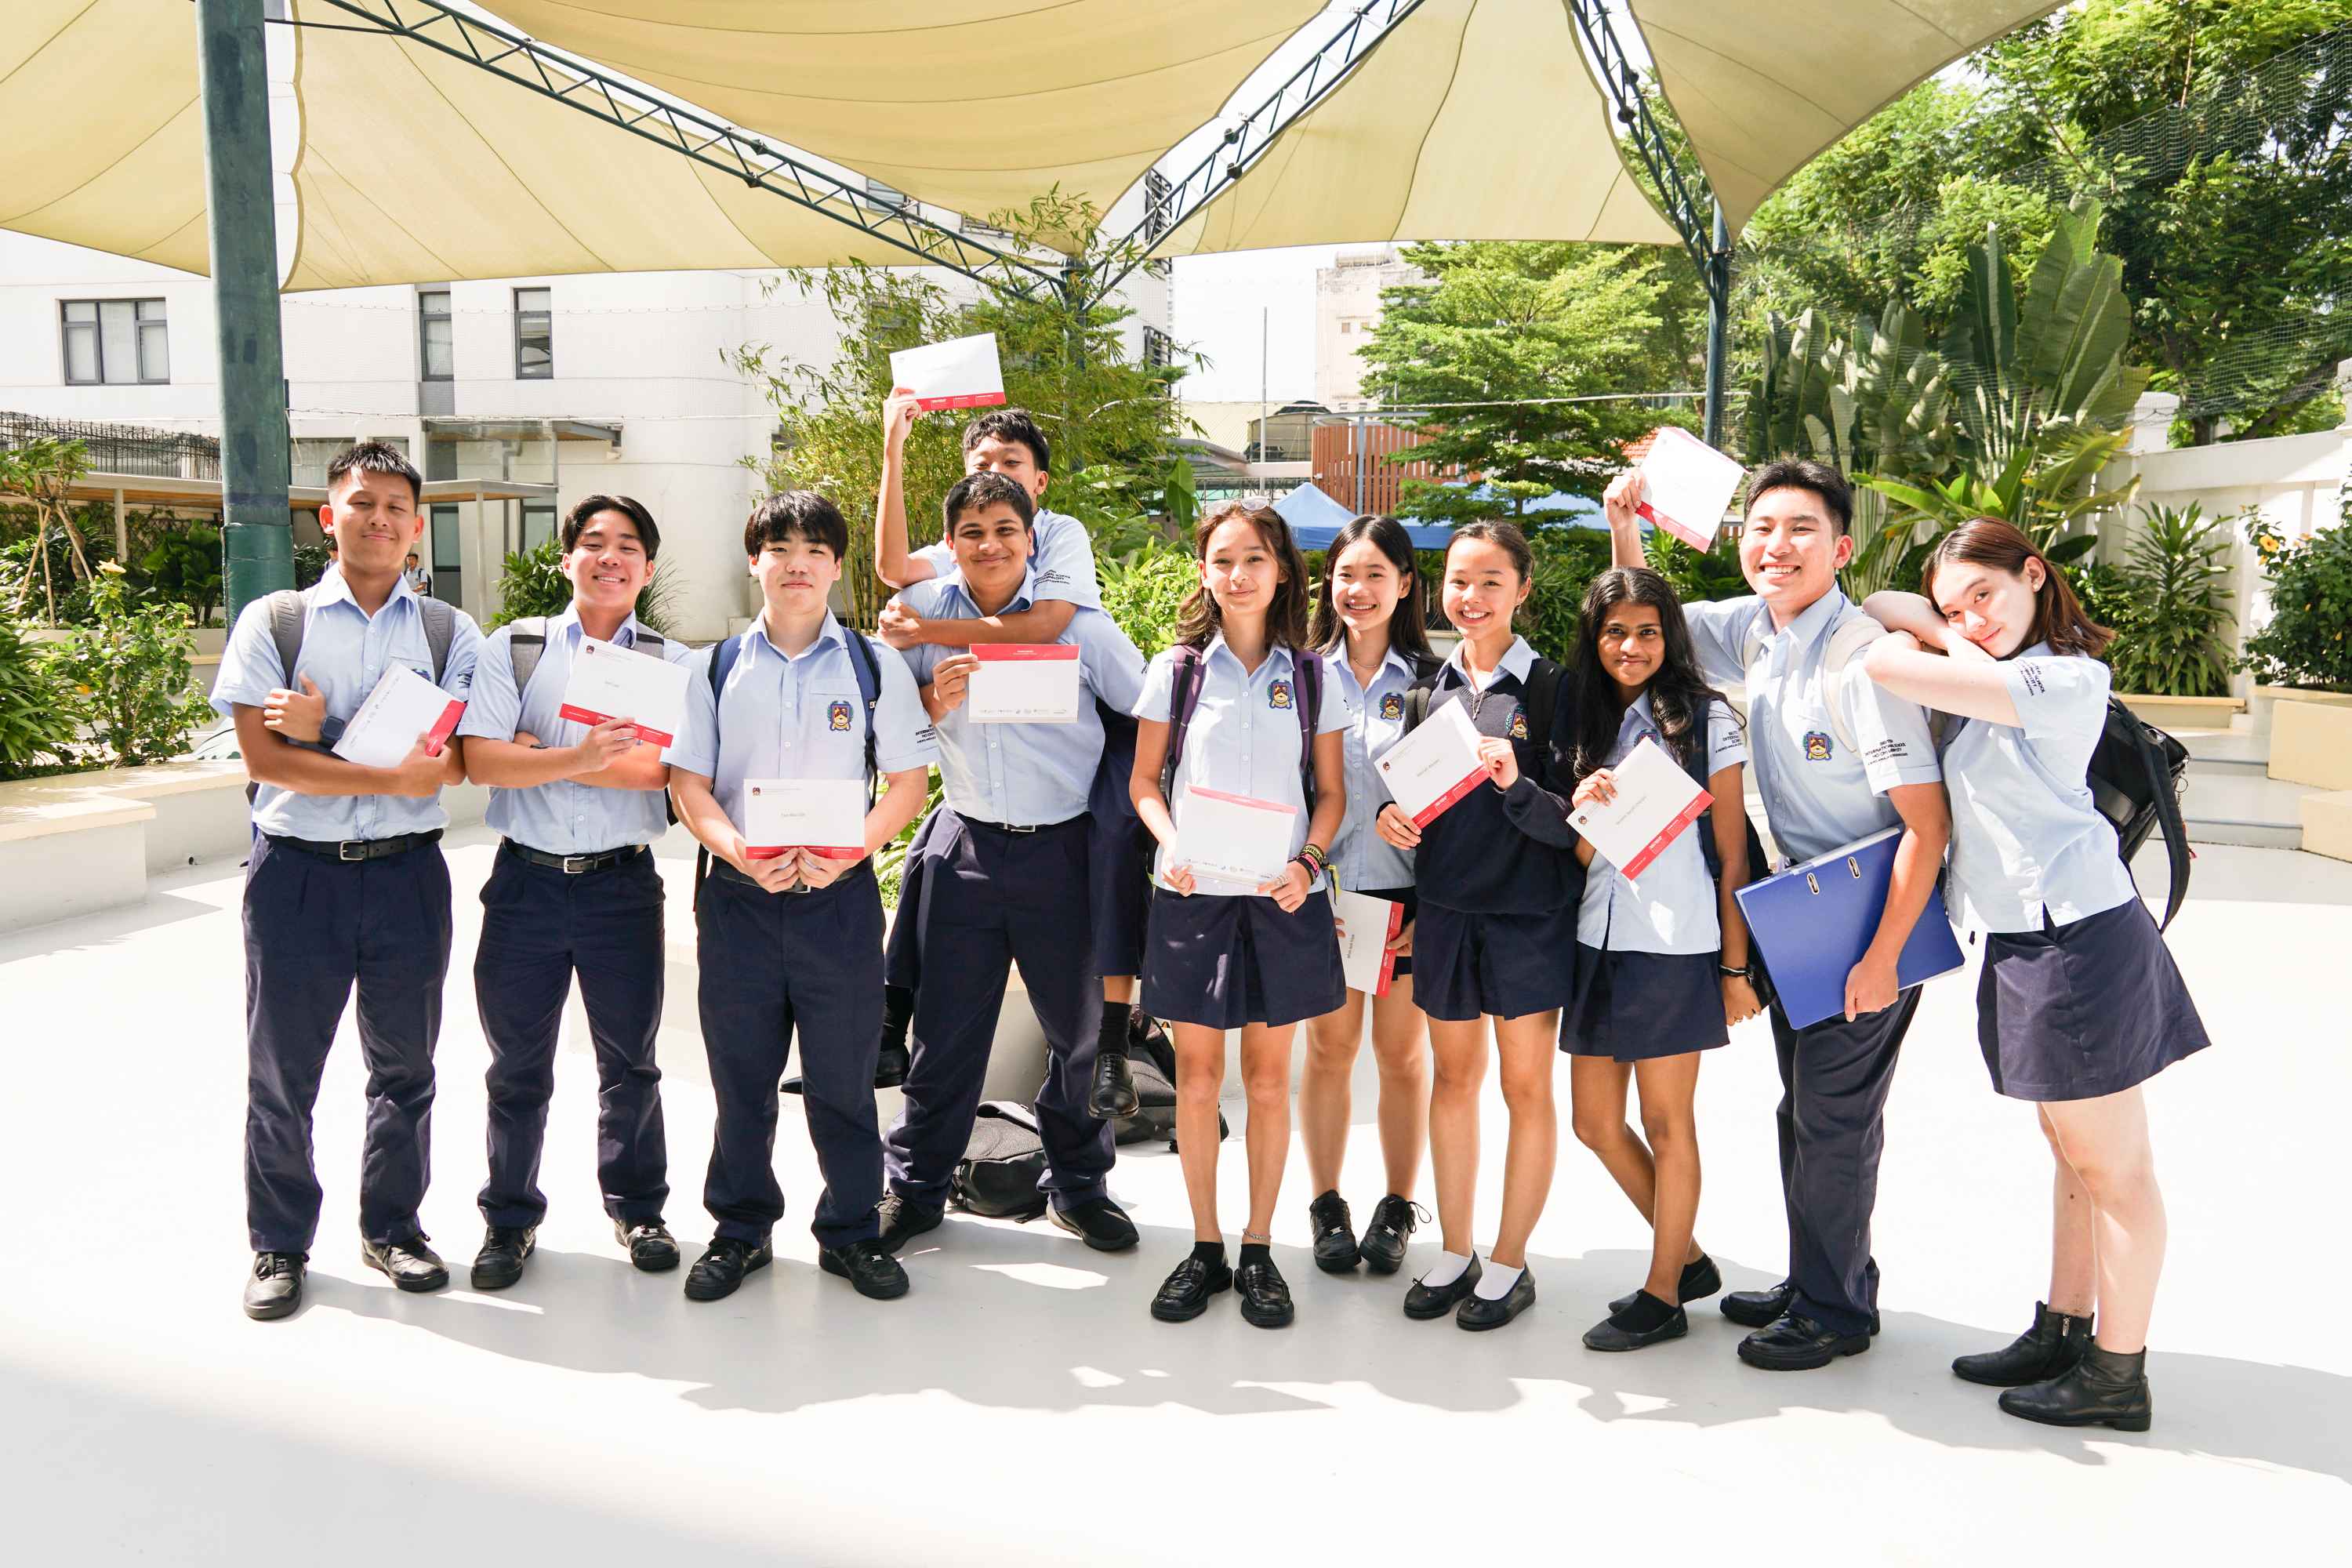 From IGCSE to IBDP: BIS HCMC students achieve outstanding results as they begin their IBDP journey - Incredible IGCSE results achieved by BIS HCMC students 2023